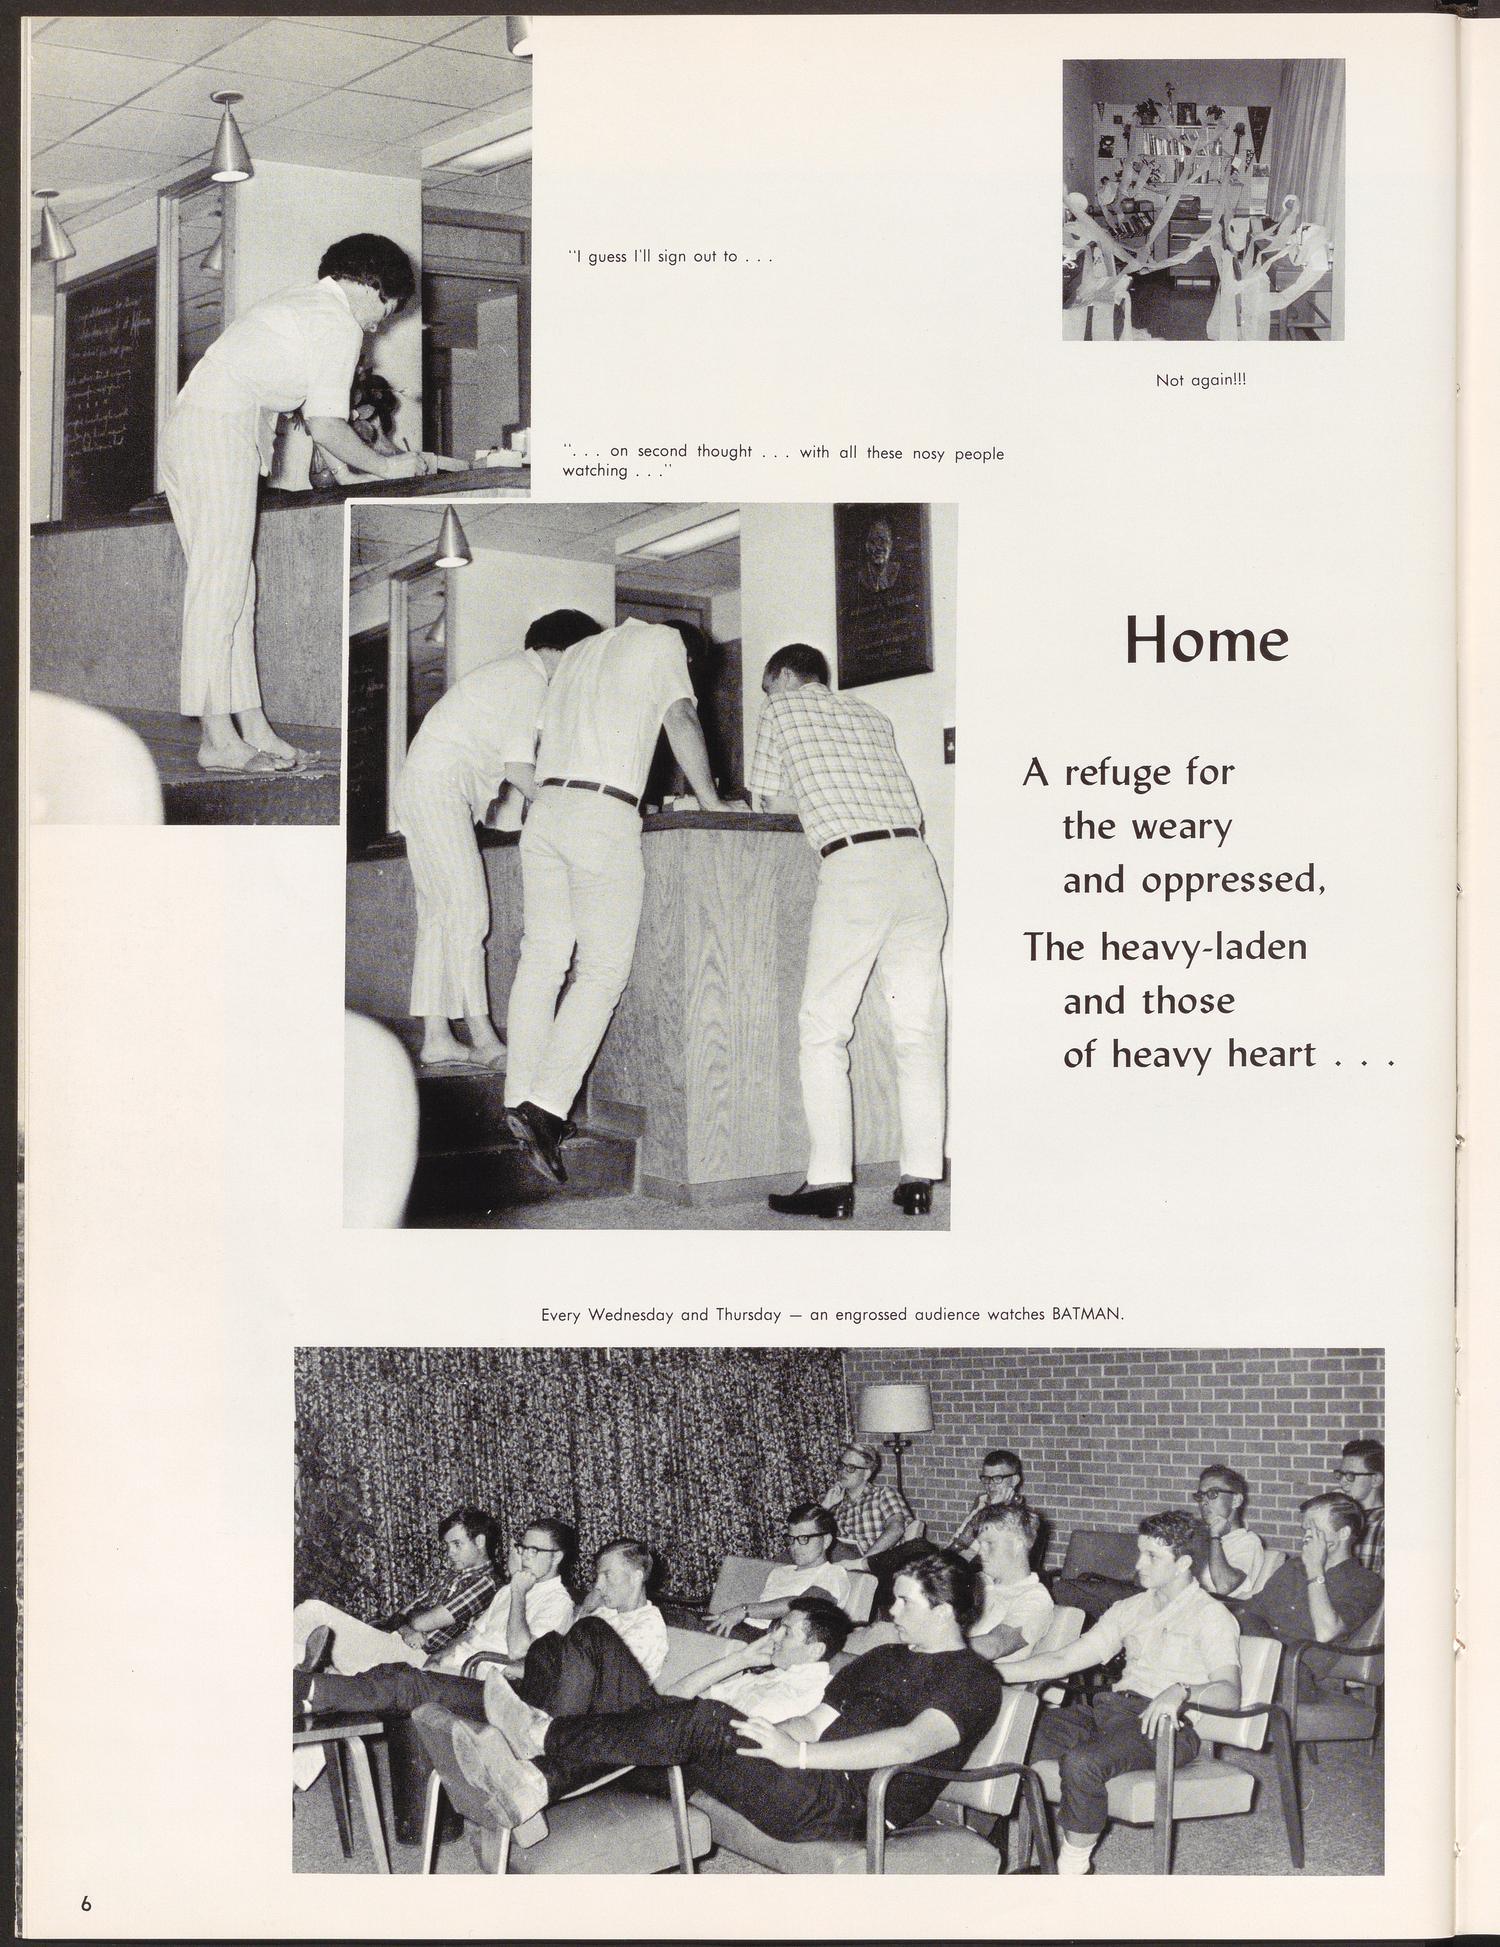 The Growl, Yearbook of Texas Lutheran College: 1966
                                                
                                                    6
                                                